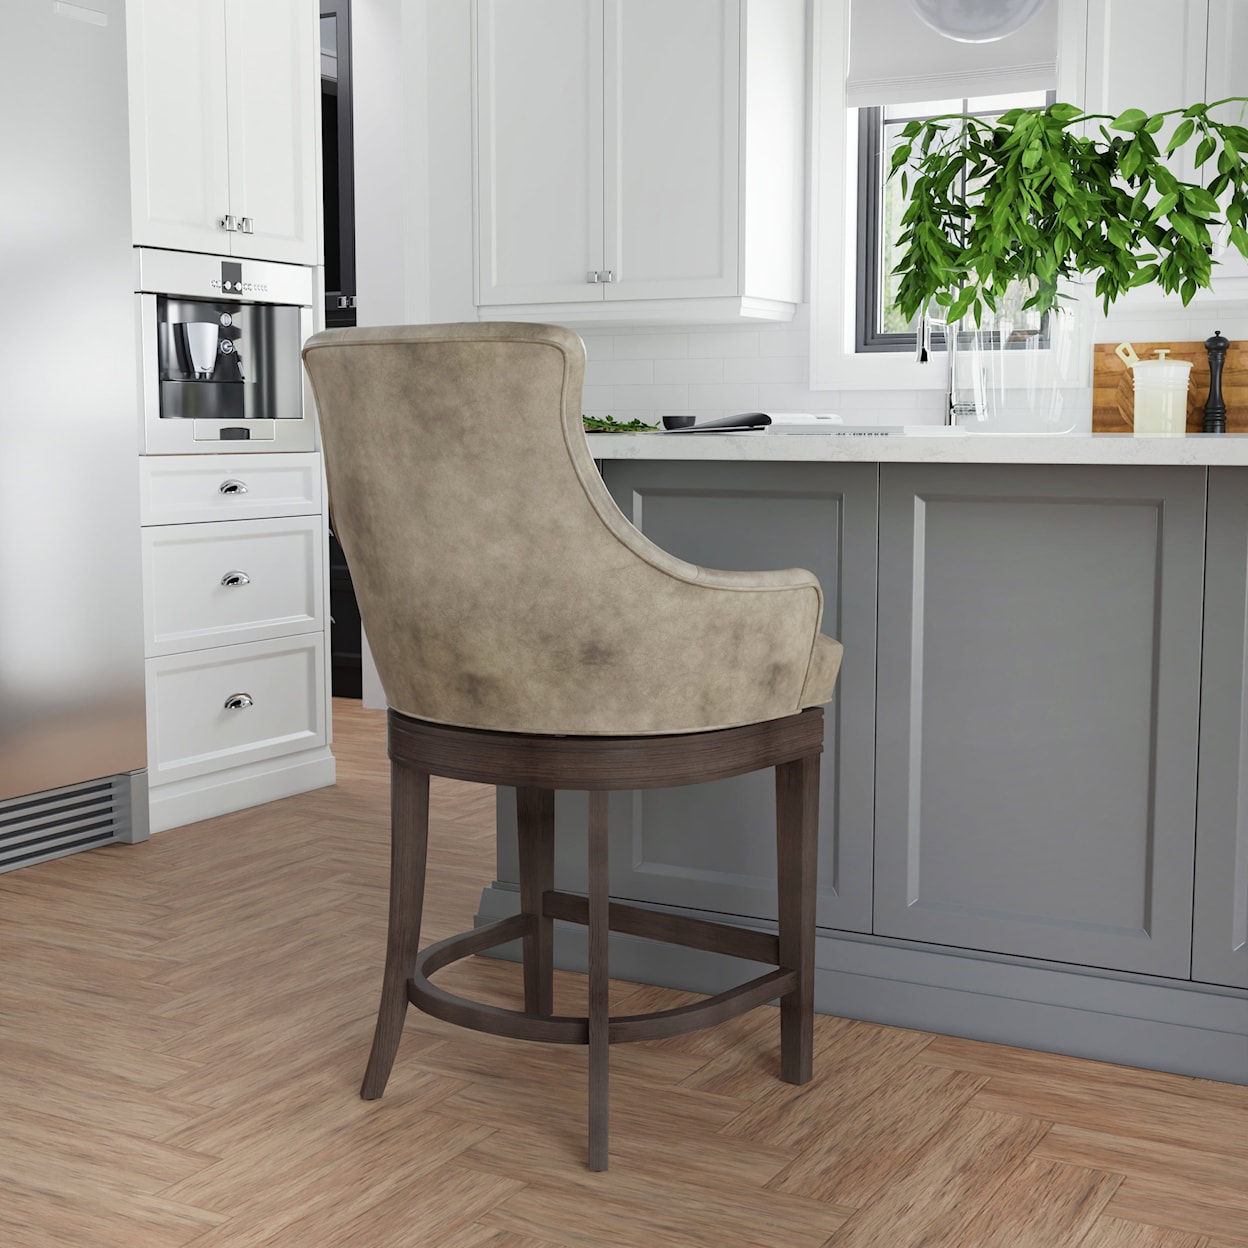 Hillsdale Creekside Counter Stool